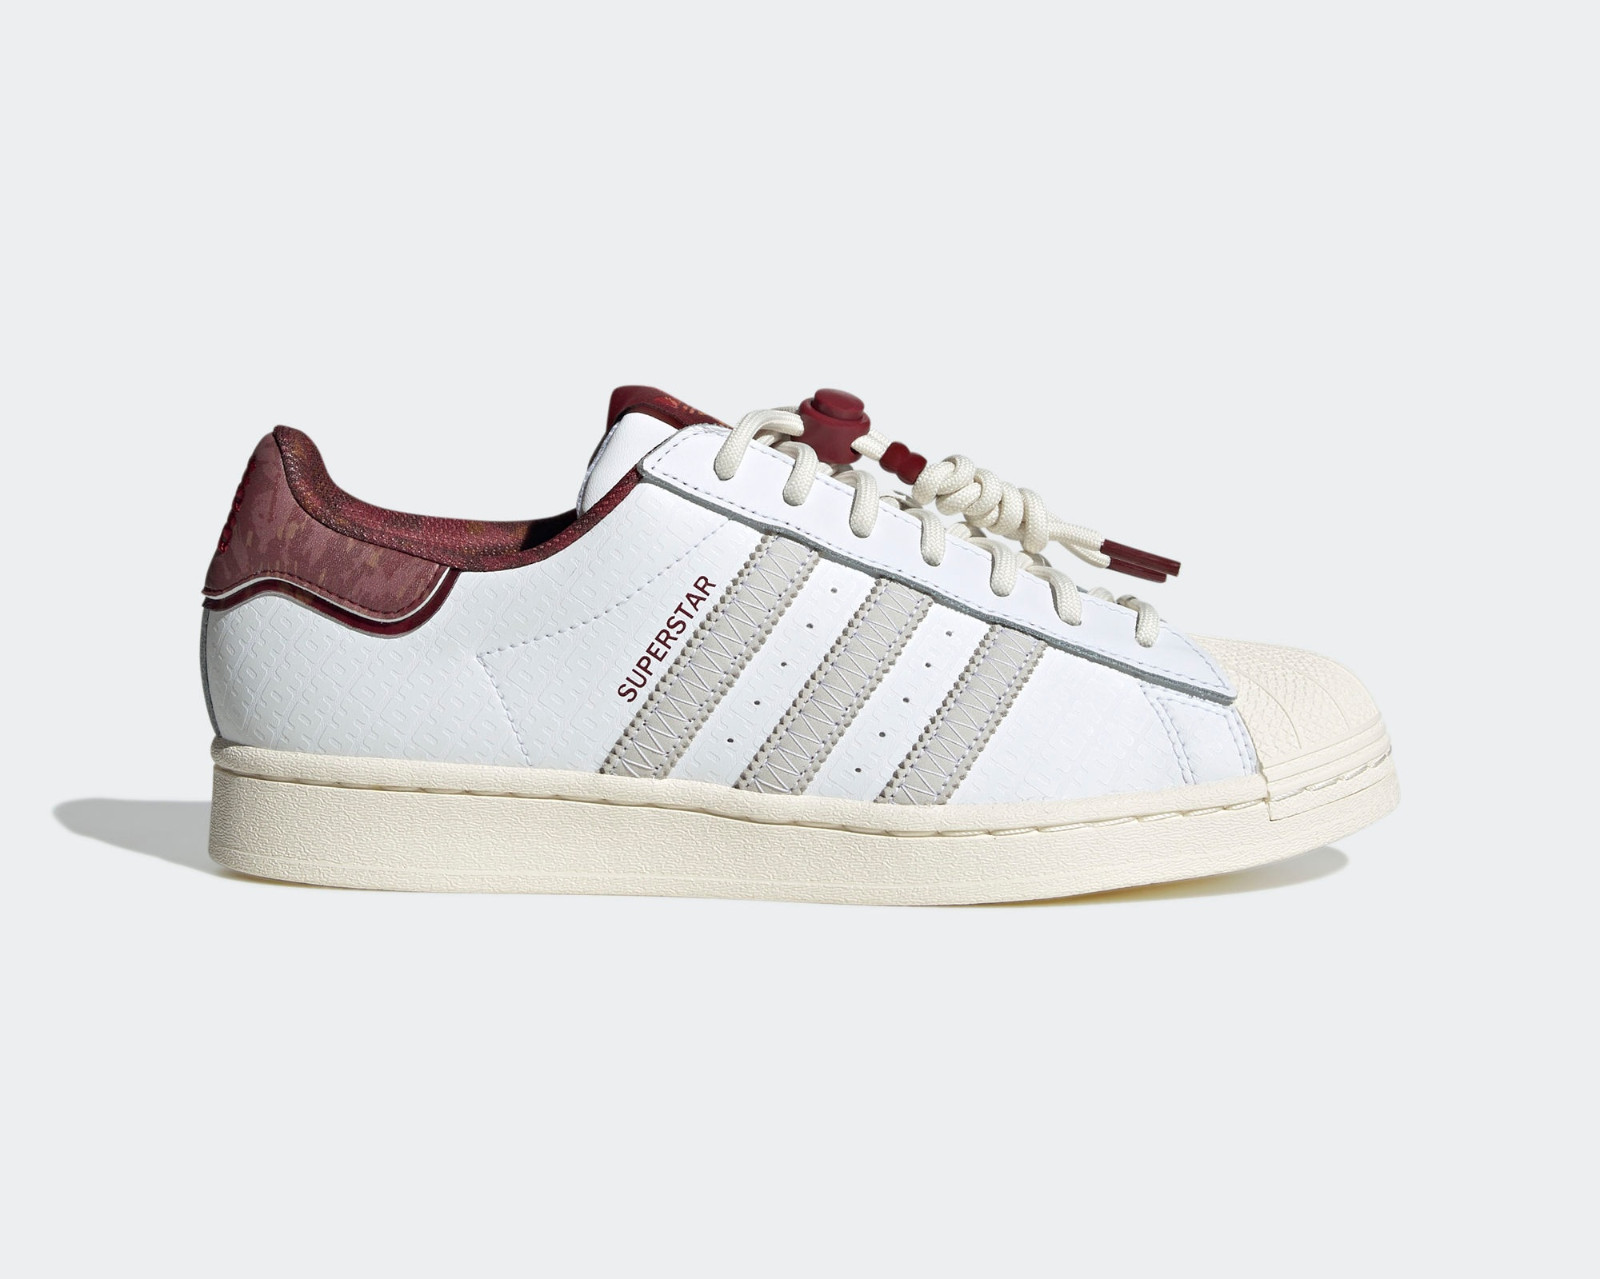 Adidas Originals Superstar Chinese New Year 2023 Cloud White Noble Maroon IF2577 Sepsale - adidas Zentic sneakers